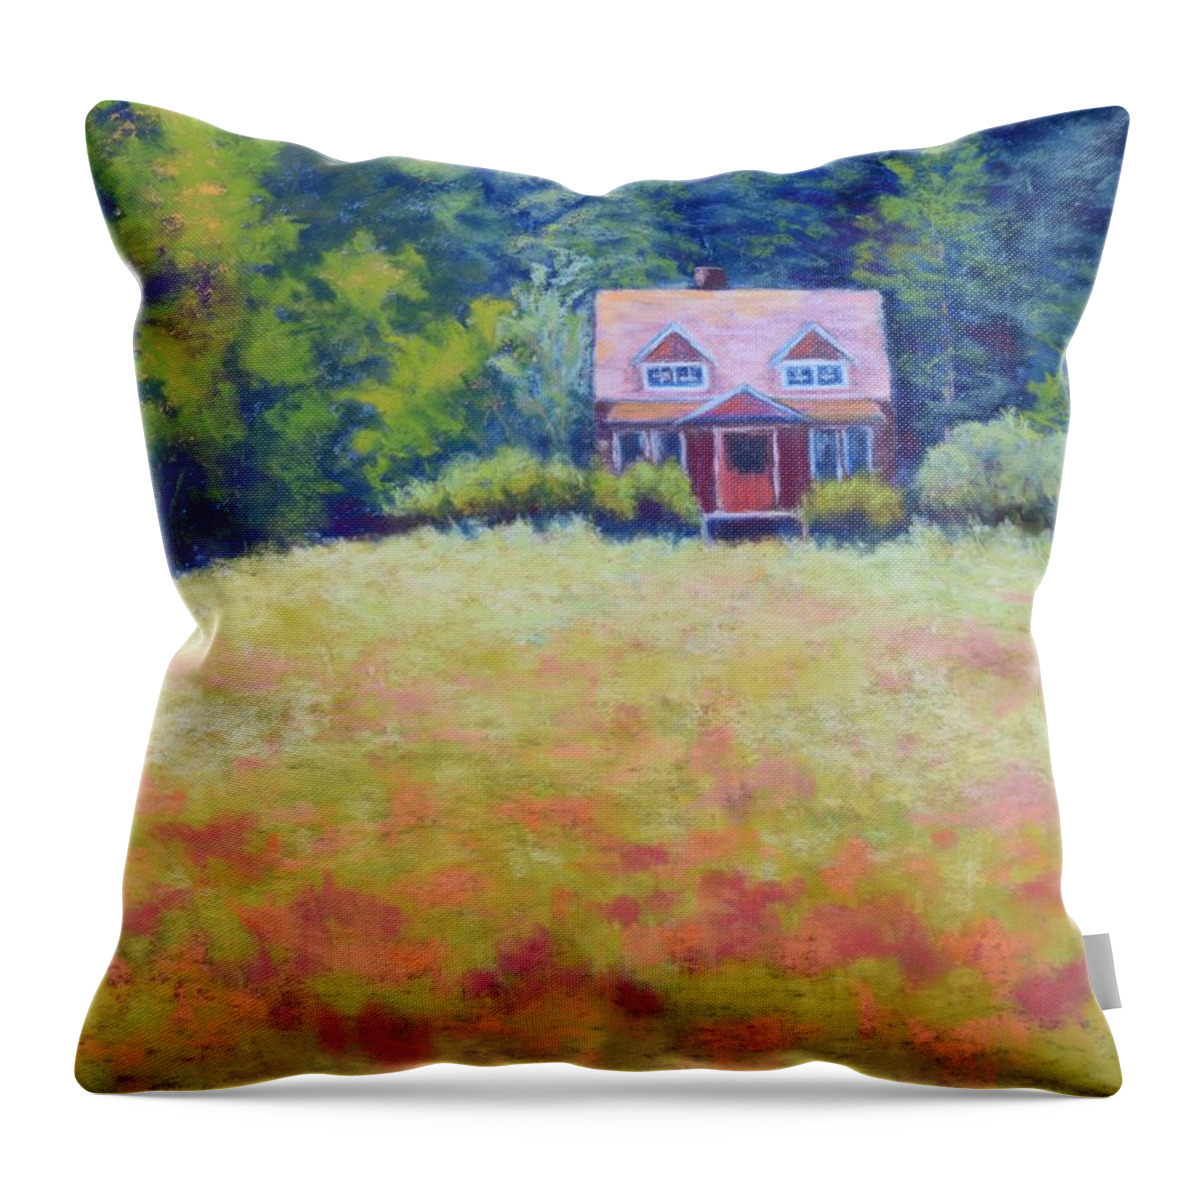 Homestead Throw Pillow featuring the painting Homestead by Nancy Jolley